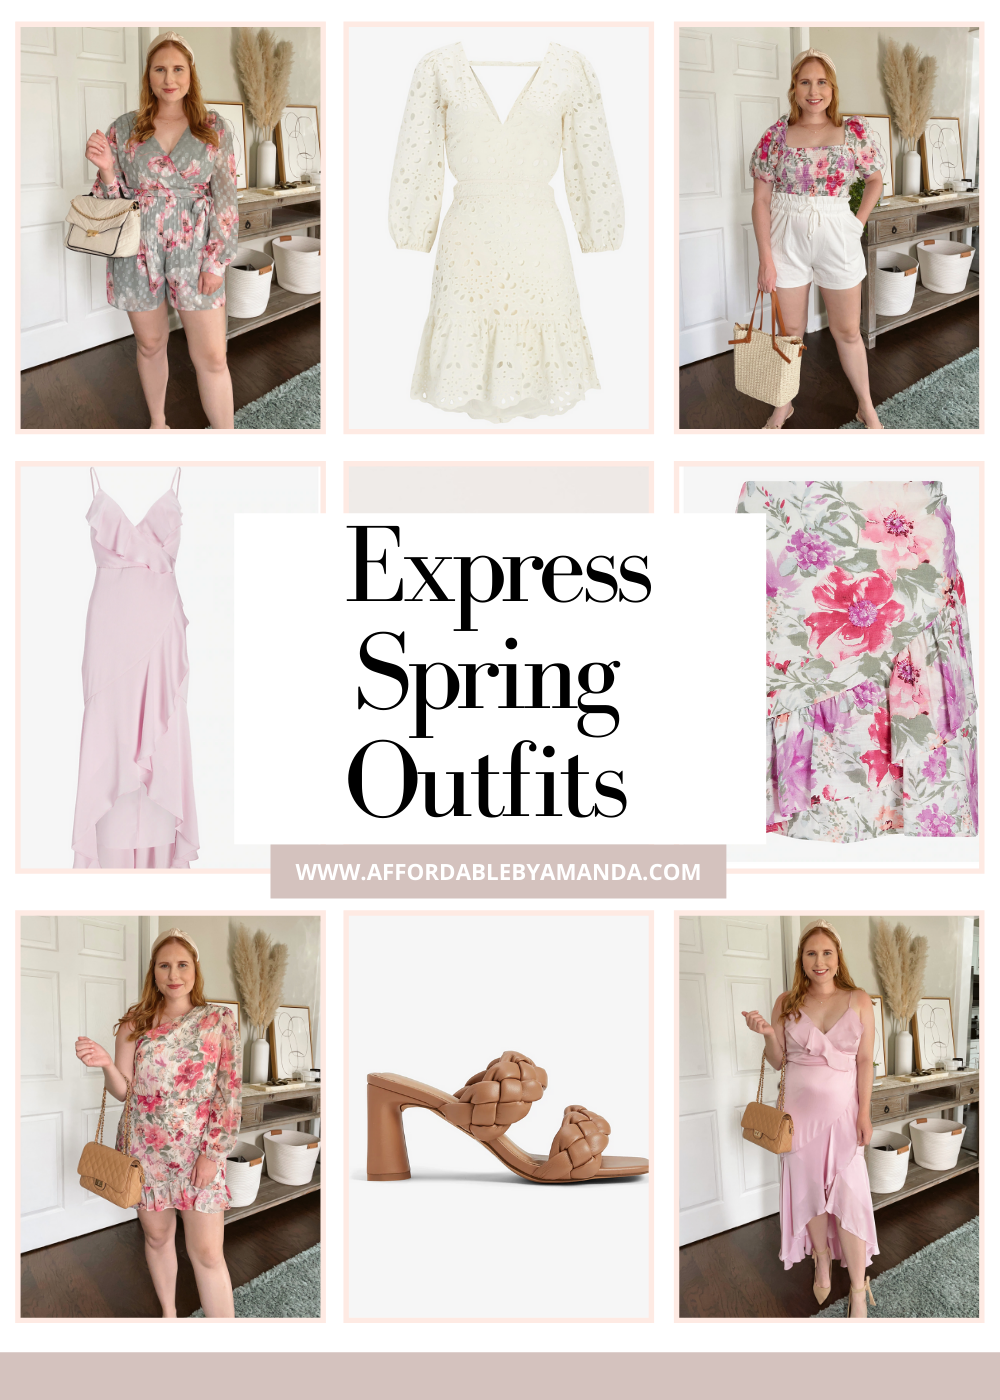 Express Outfit Ideas On Sale 50% off!!! — Live Love Blank